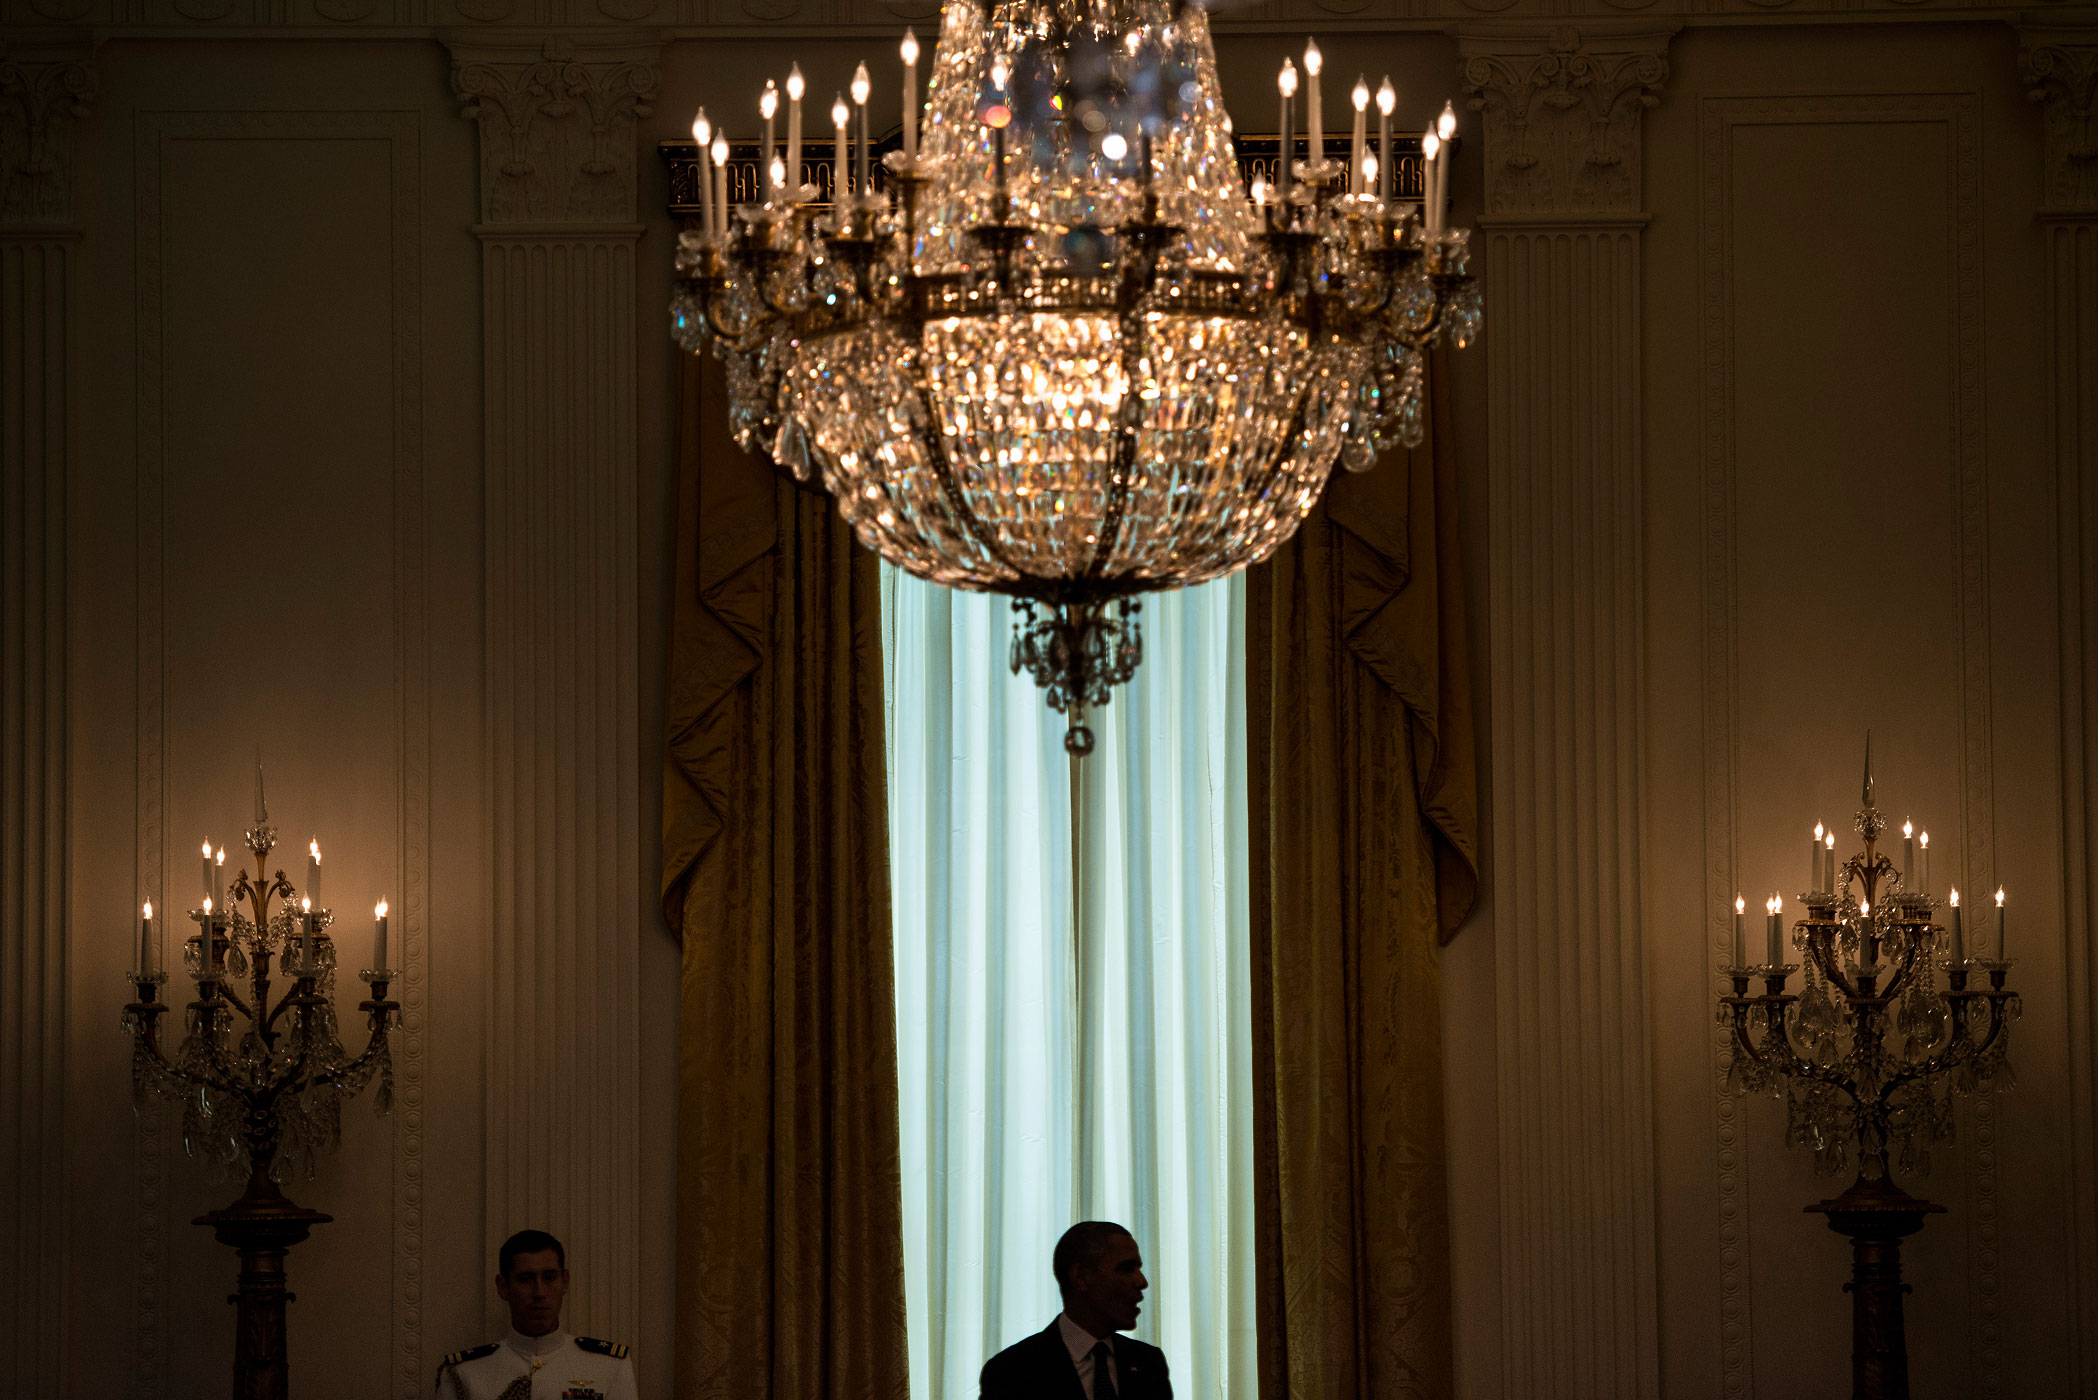 President Barack Obama greets guests during a kids' state dinner in the East Room Room of the White House, July 9, 2013.